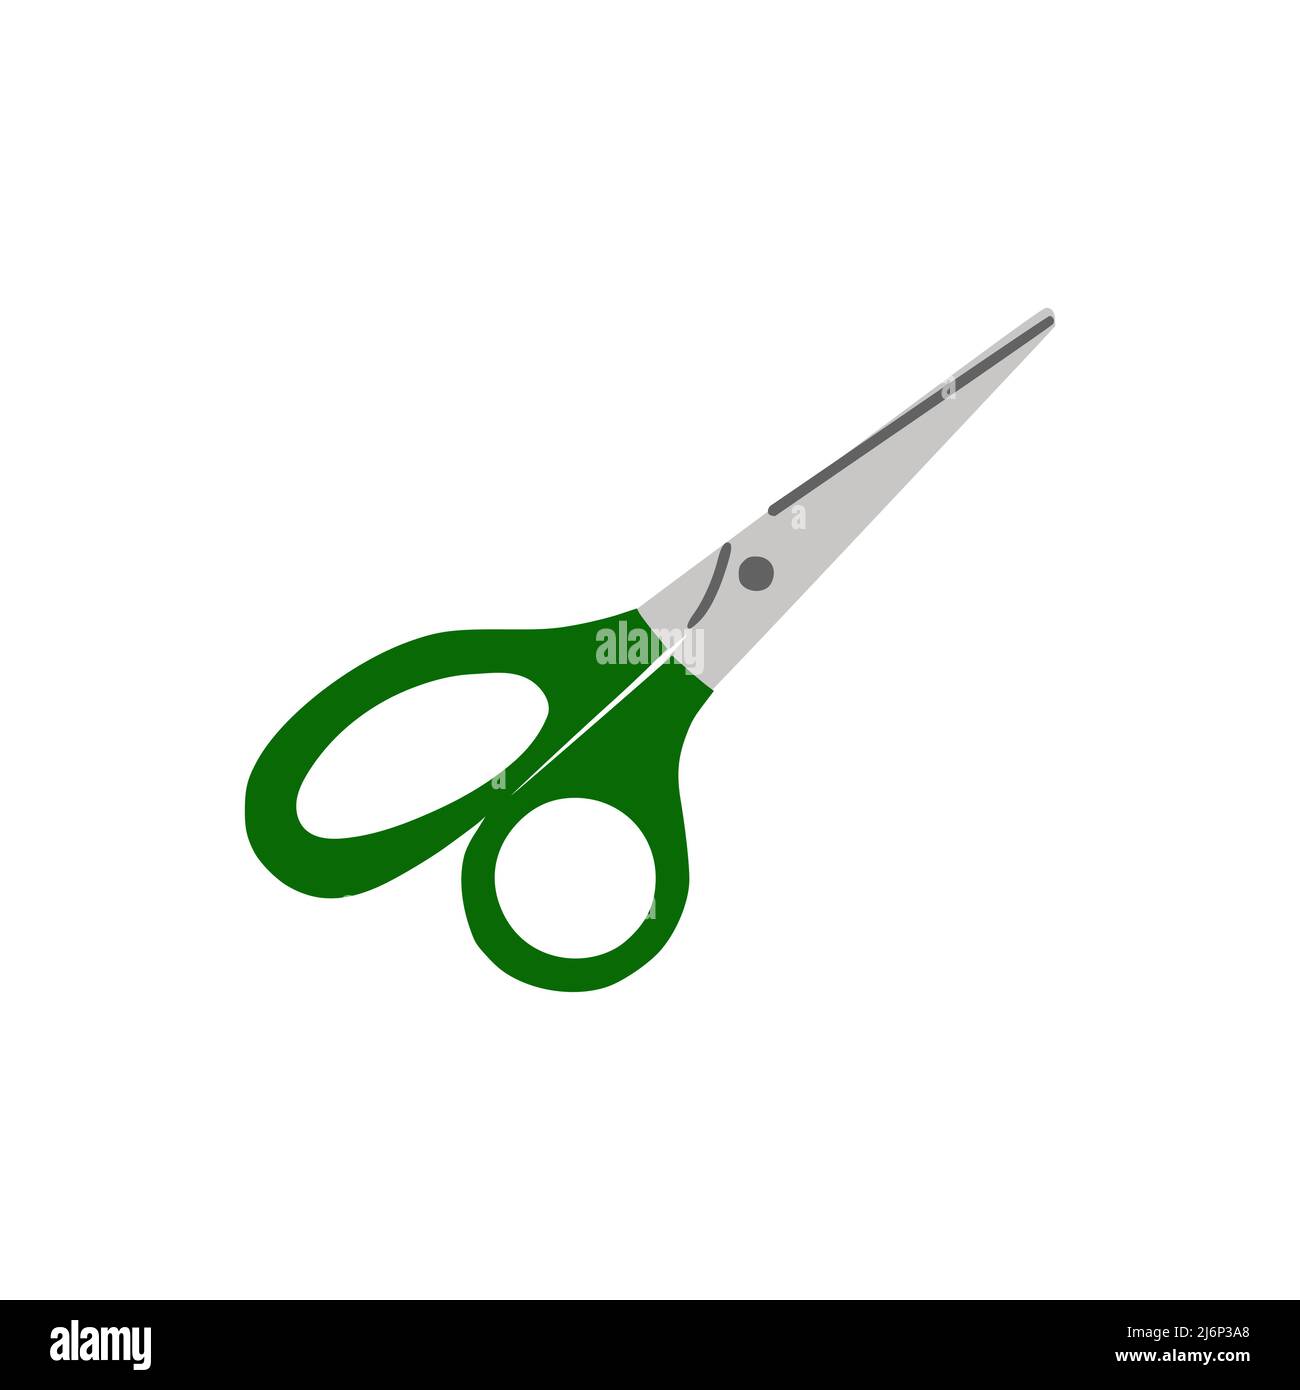 Closed Scissors in Doodle style. A school tool for cutting and creativity. A simple drawing is drawn by hand. Isolated on a white background. Color ve Stock Vector